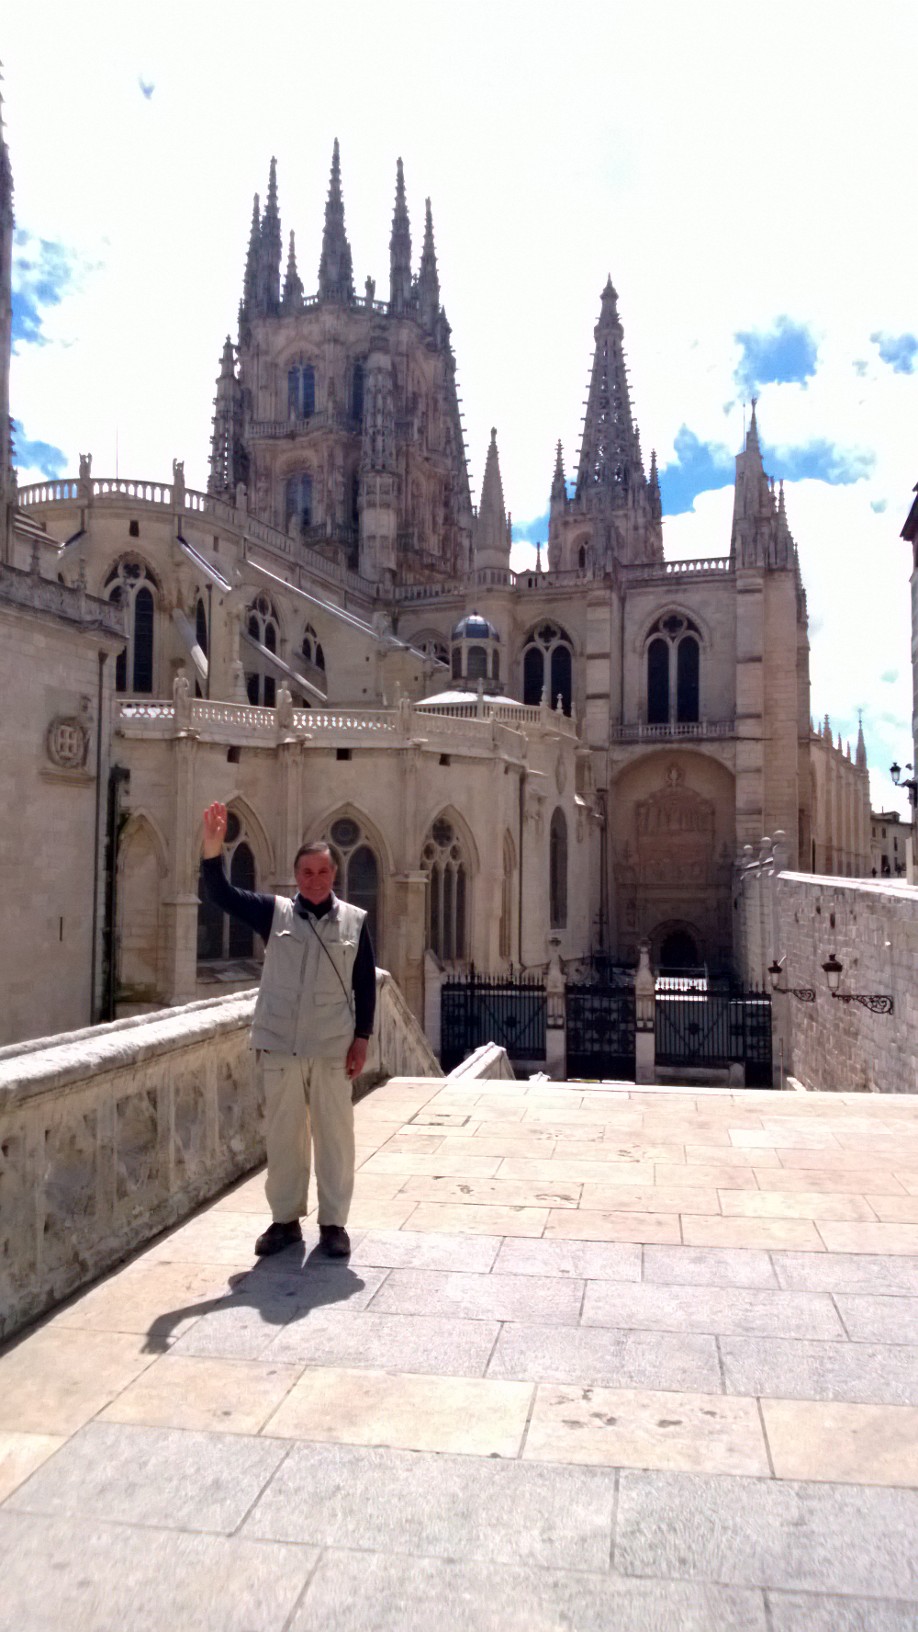 ..//images/20130510_005_Charles_Leon_cathedral.jpg